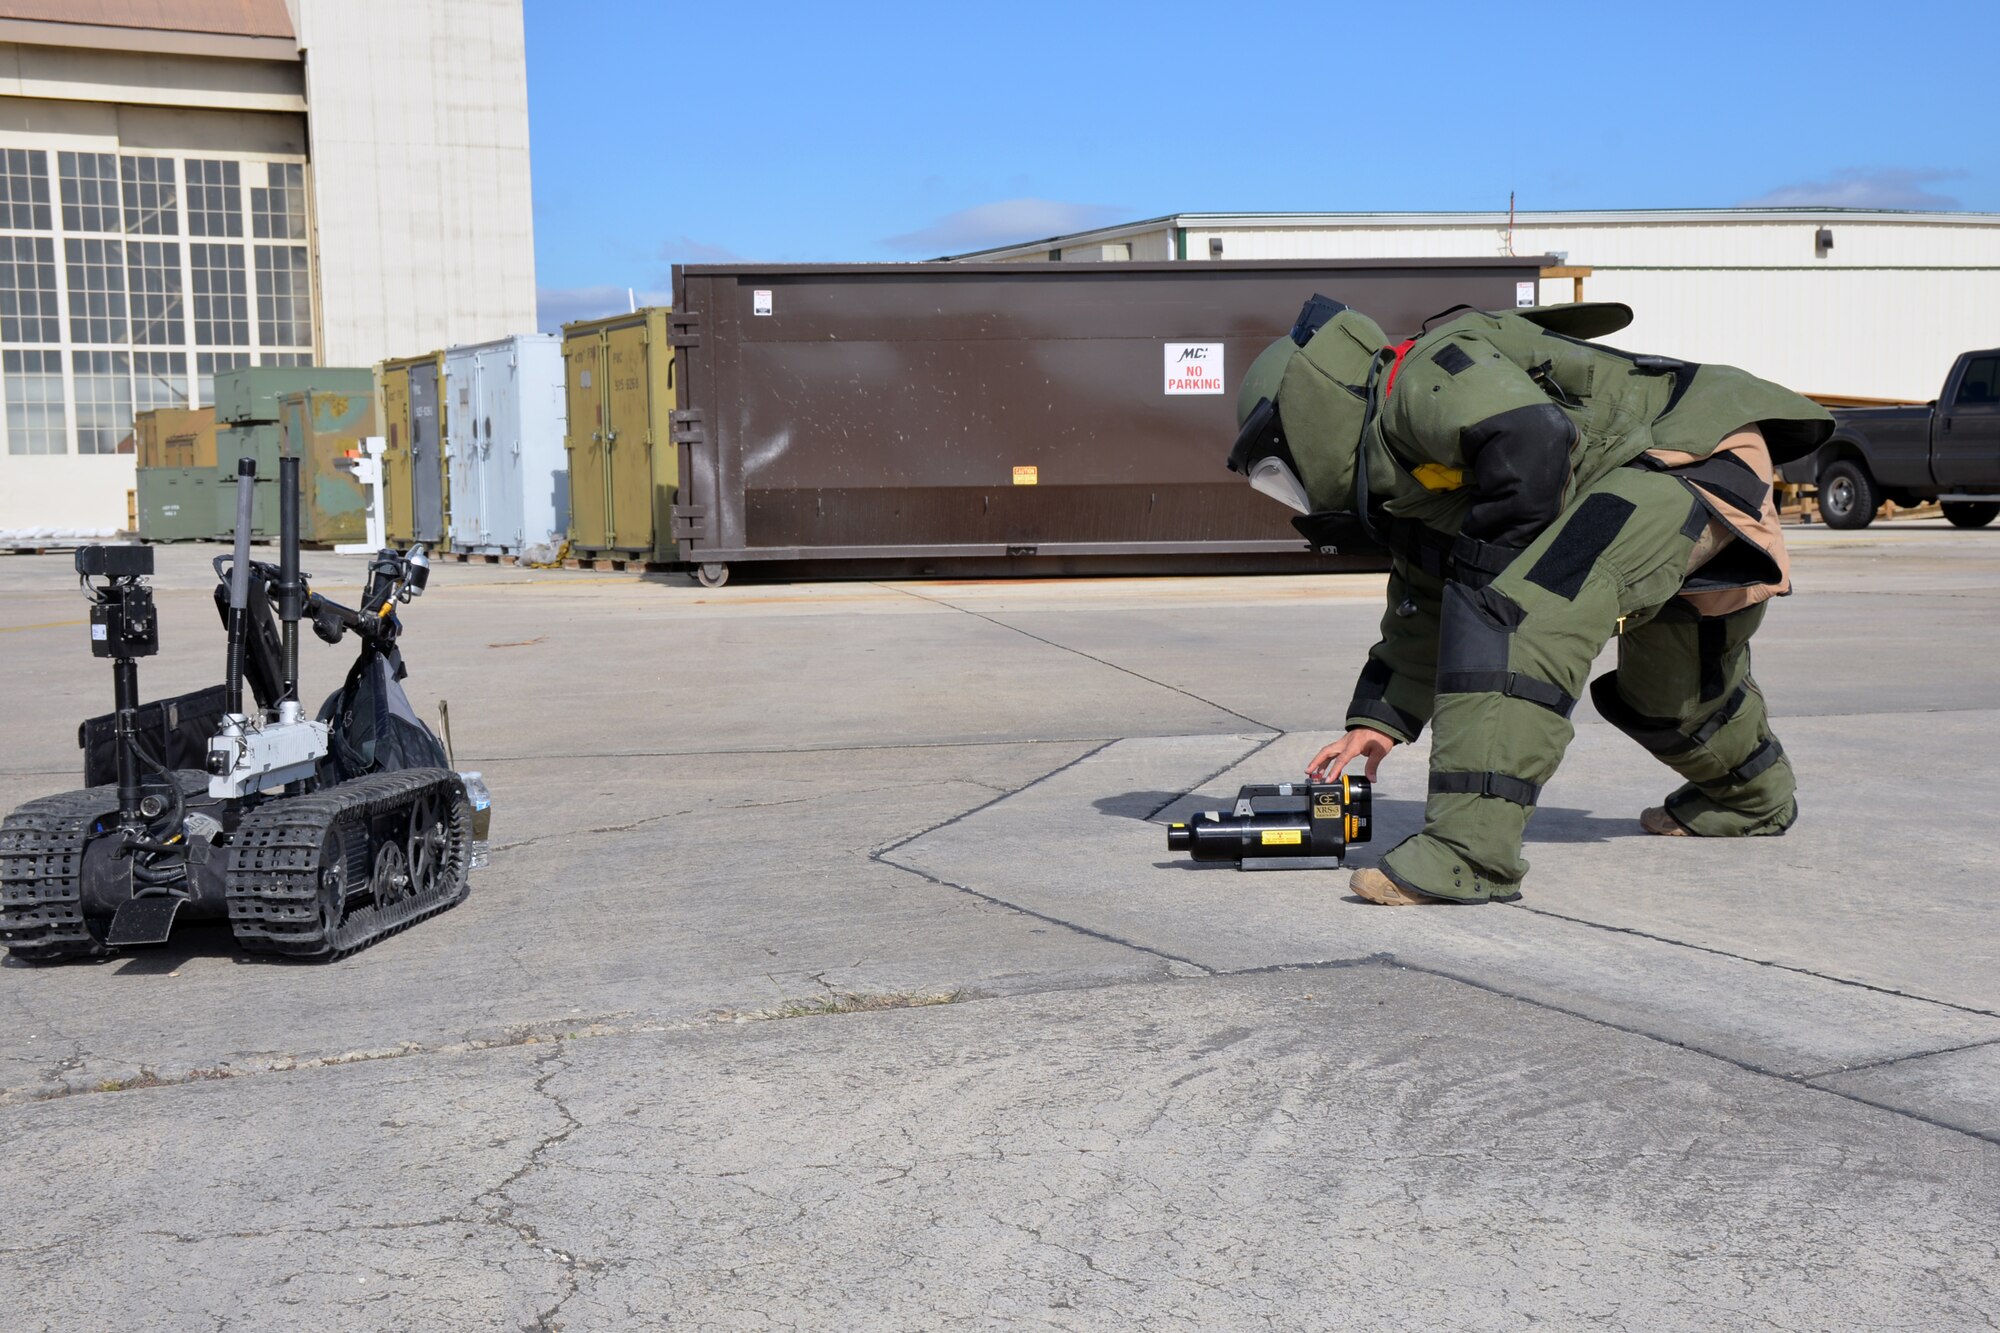 Tech. Sgt. James M. Gonzales, 433rd Civil Engineer Squadron explosive ordnance disposal specialist, sets up a portable X-ray system to inspect a suspicious package held by a Talon explosive ordnance disposal robot during a wing-wide readiness exercise at Joint Base San Antonio-Lackland, Texas Nov. 17, 2018.